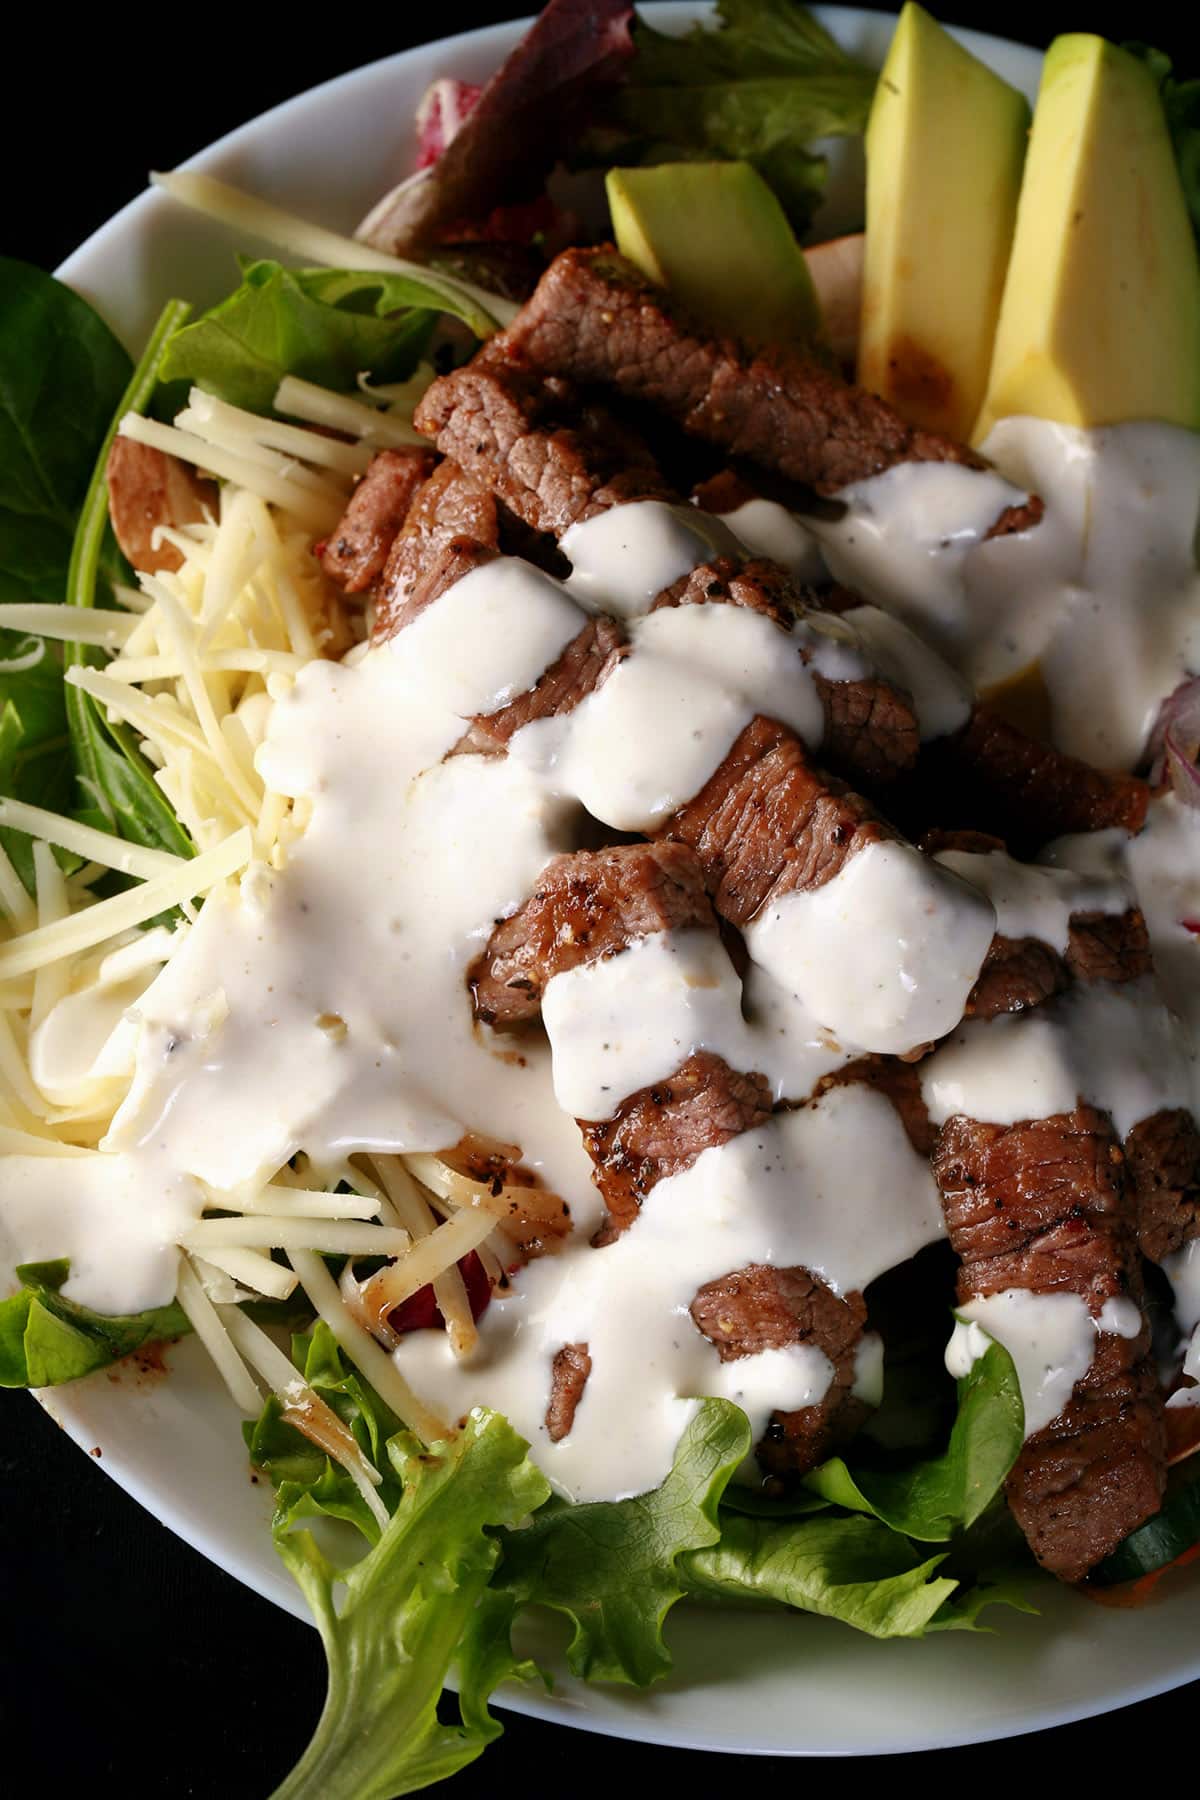 A bowl of steak salad with horseradish dressing drizzled over it.